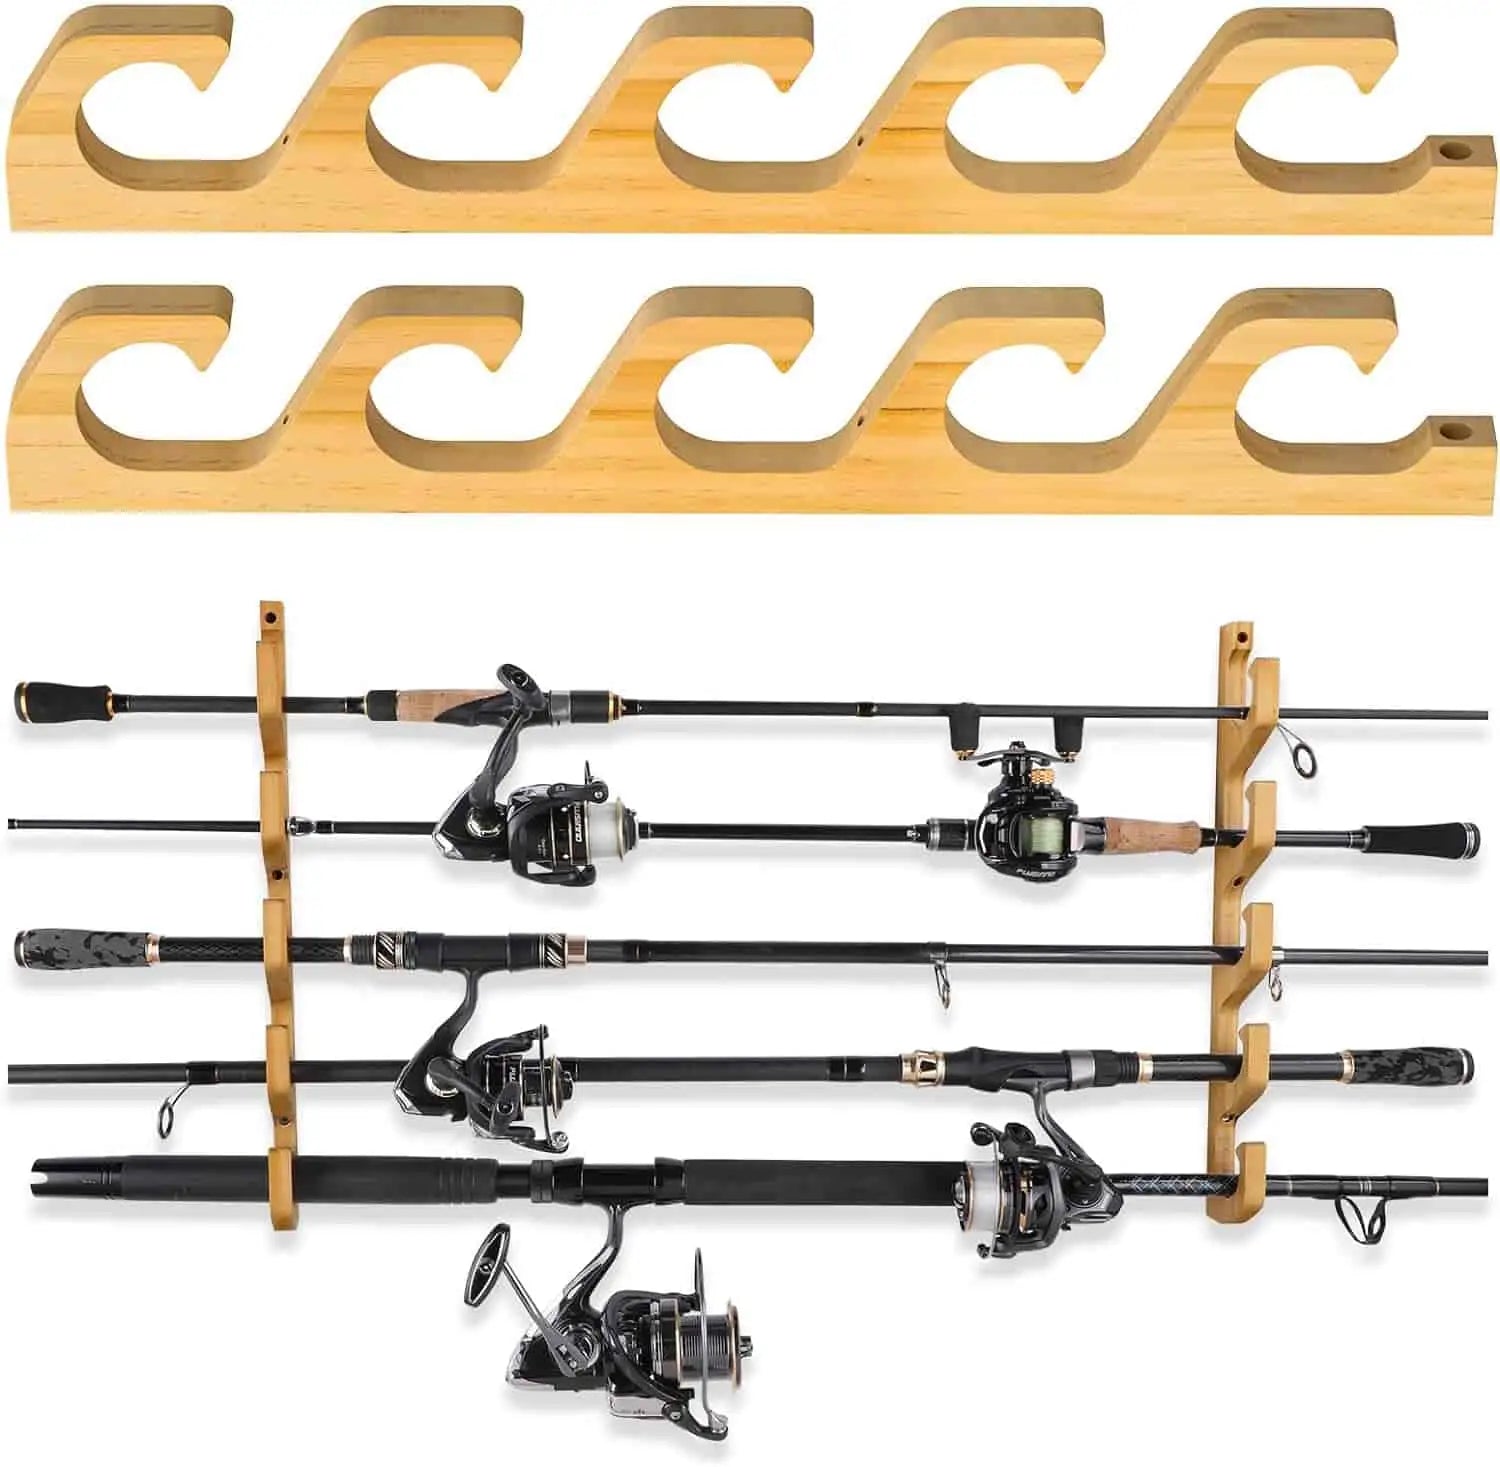 Plusinno Wall Fishing Rod Rack. This rod holder is a steal… 